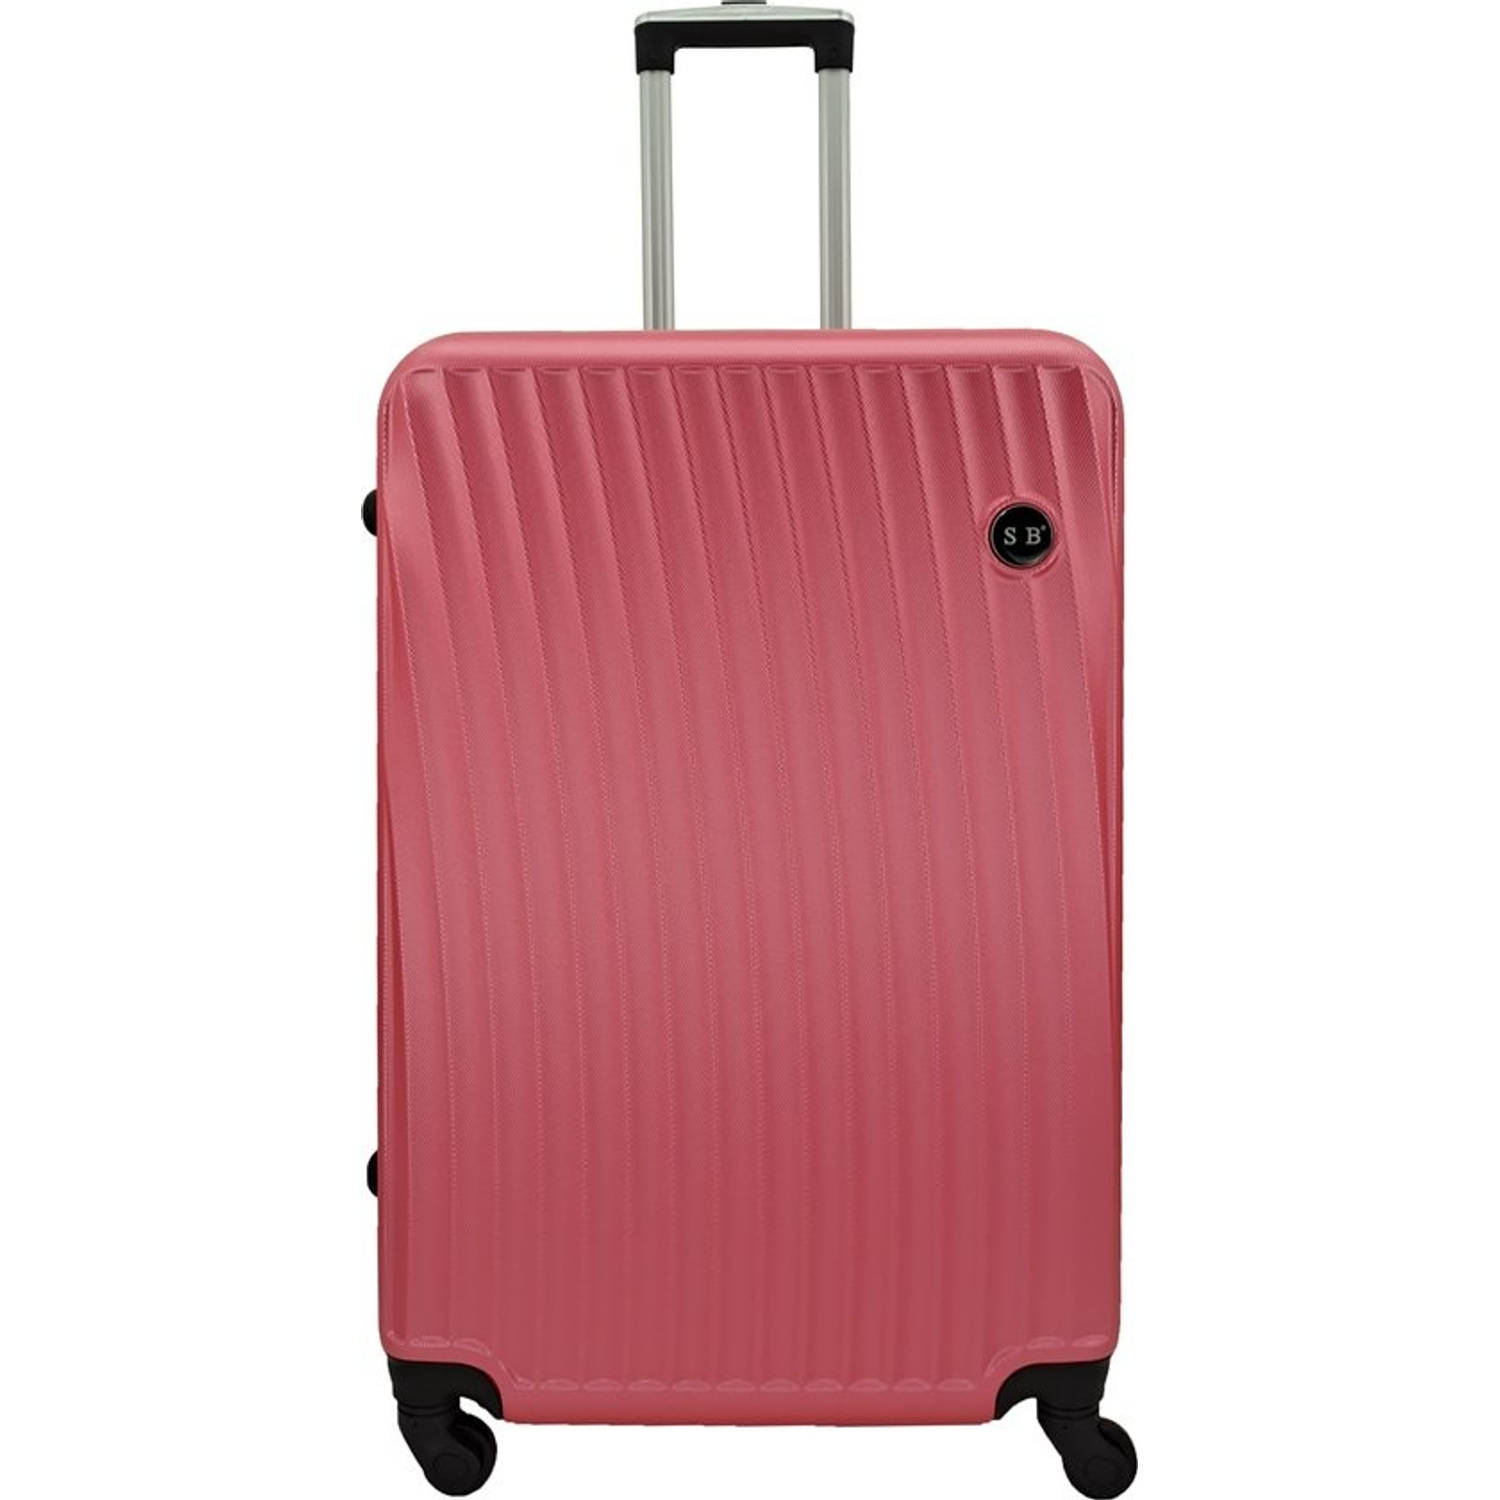 SB Travelbags Large Koffer - Roze